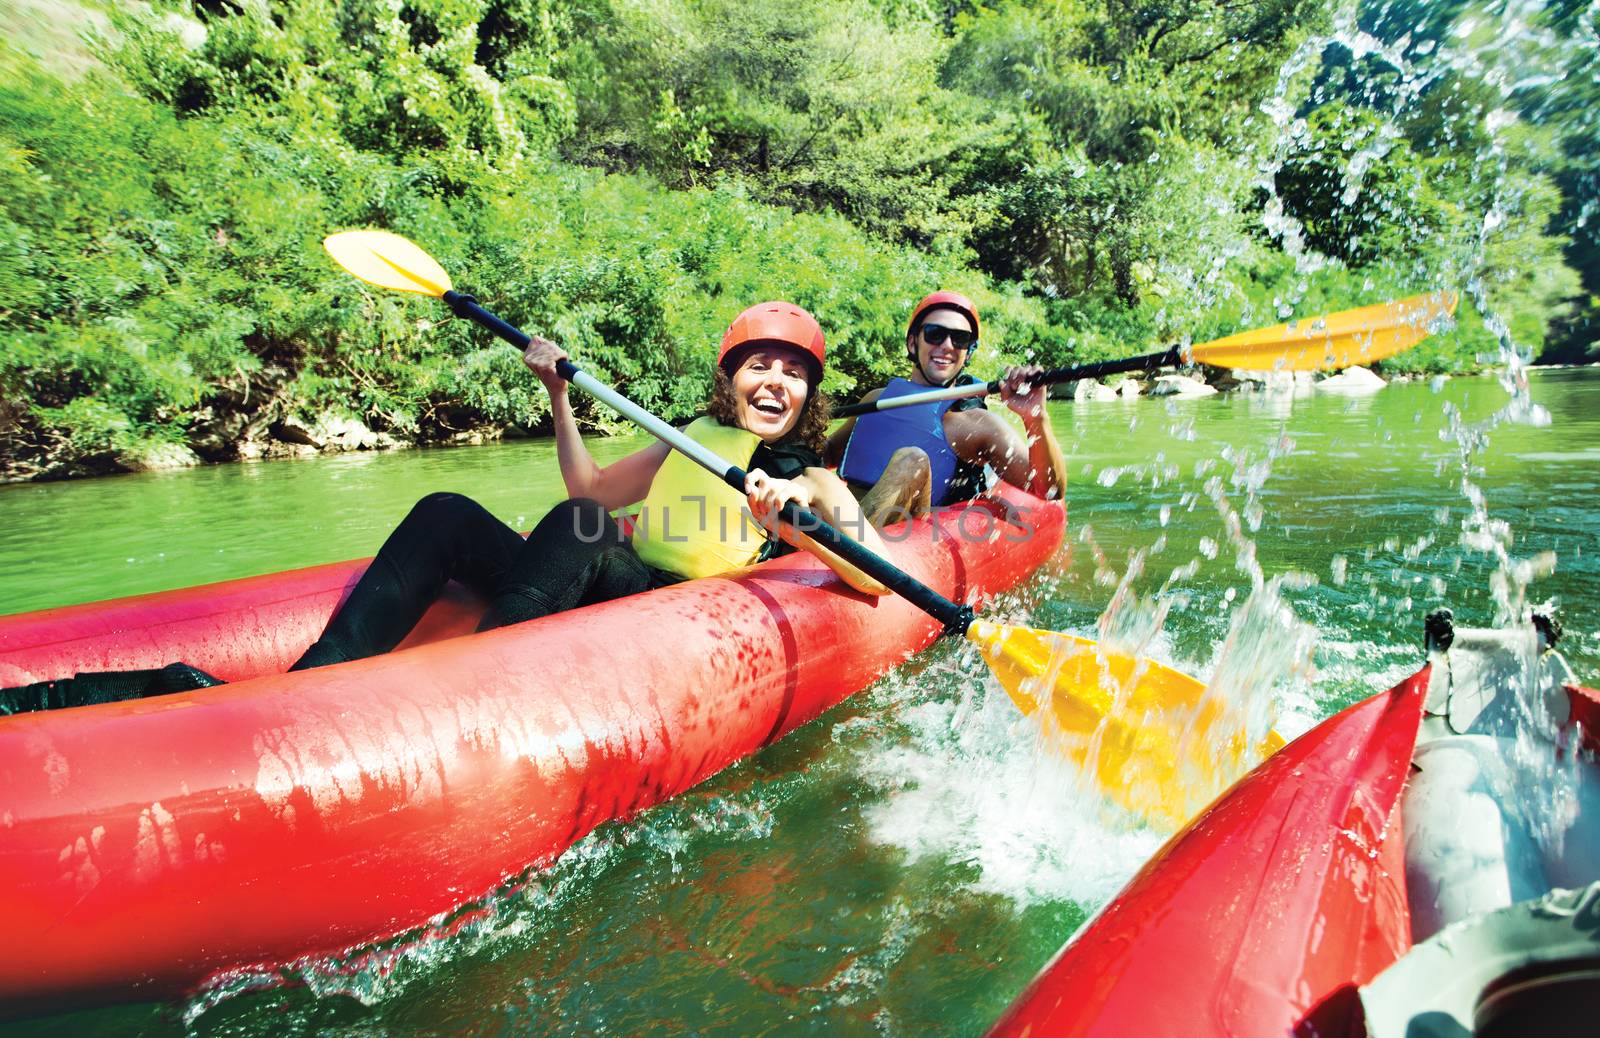 A female and a male in red inflatable canoe having fun splashing over oter with the vesals in calm waters of a river.